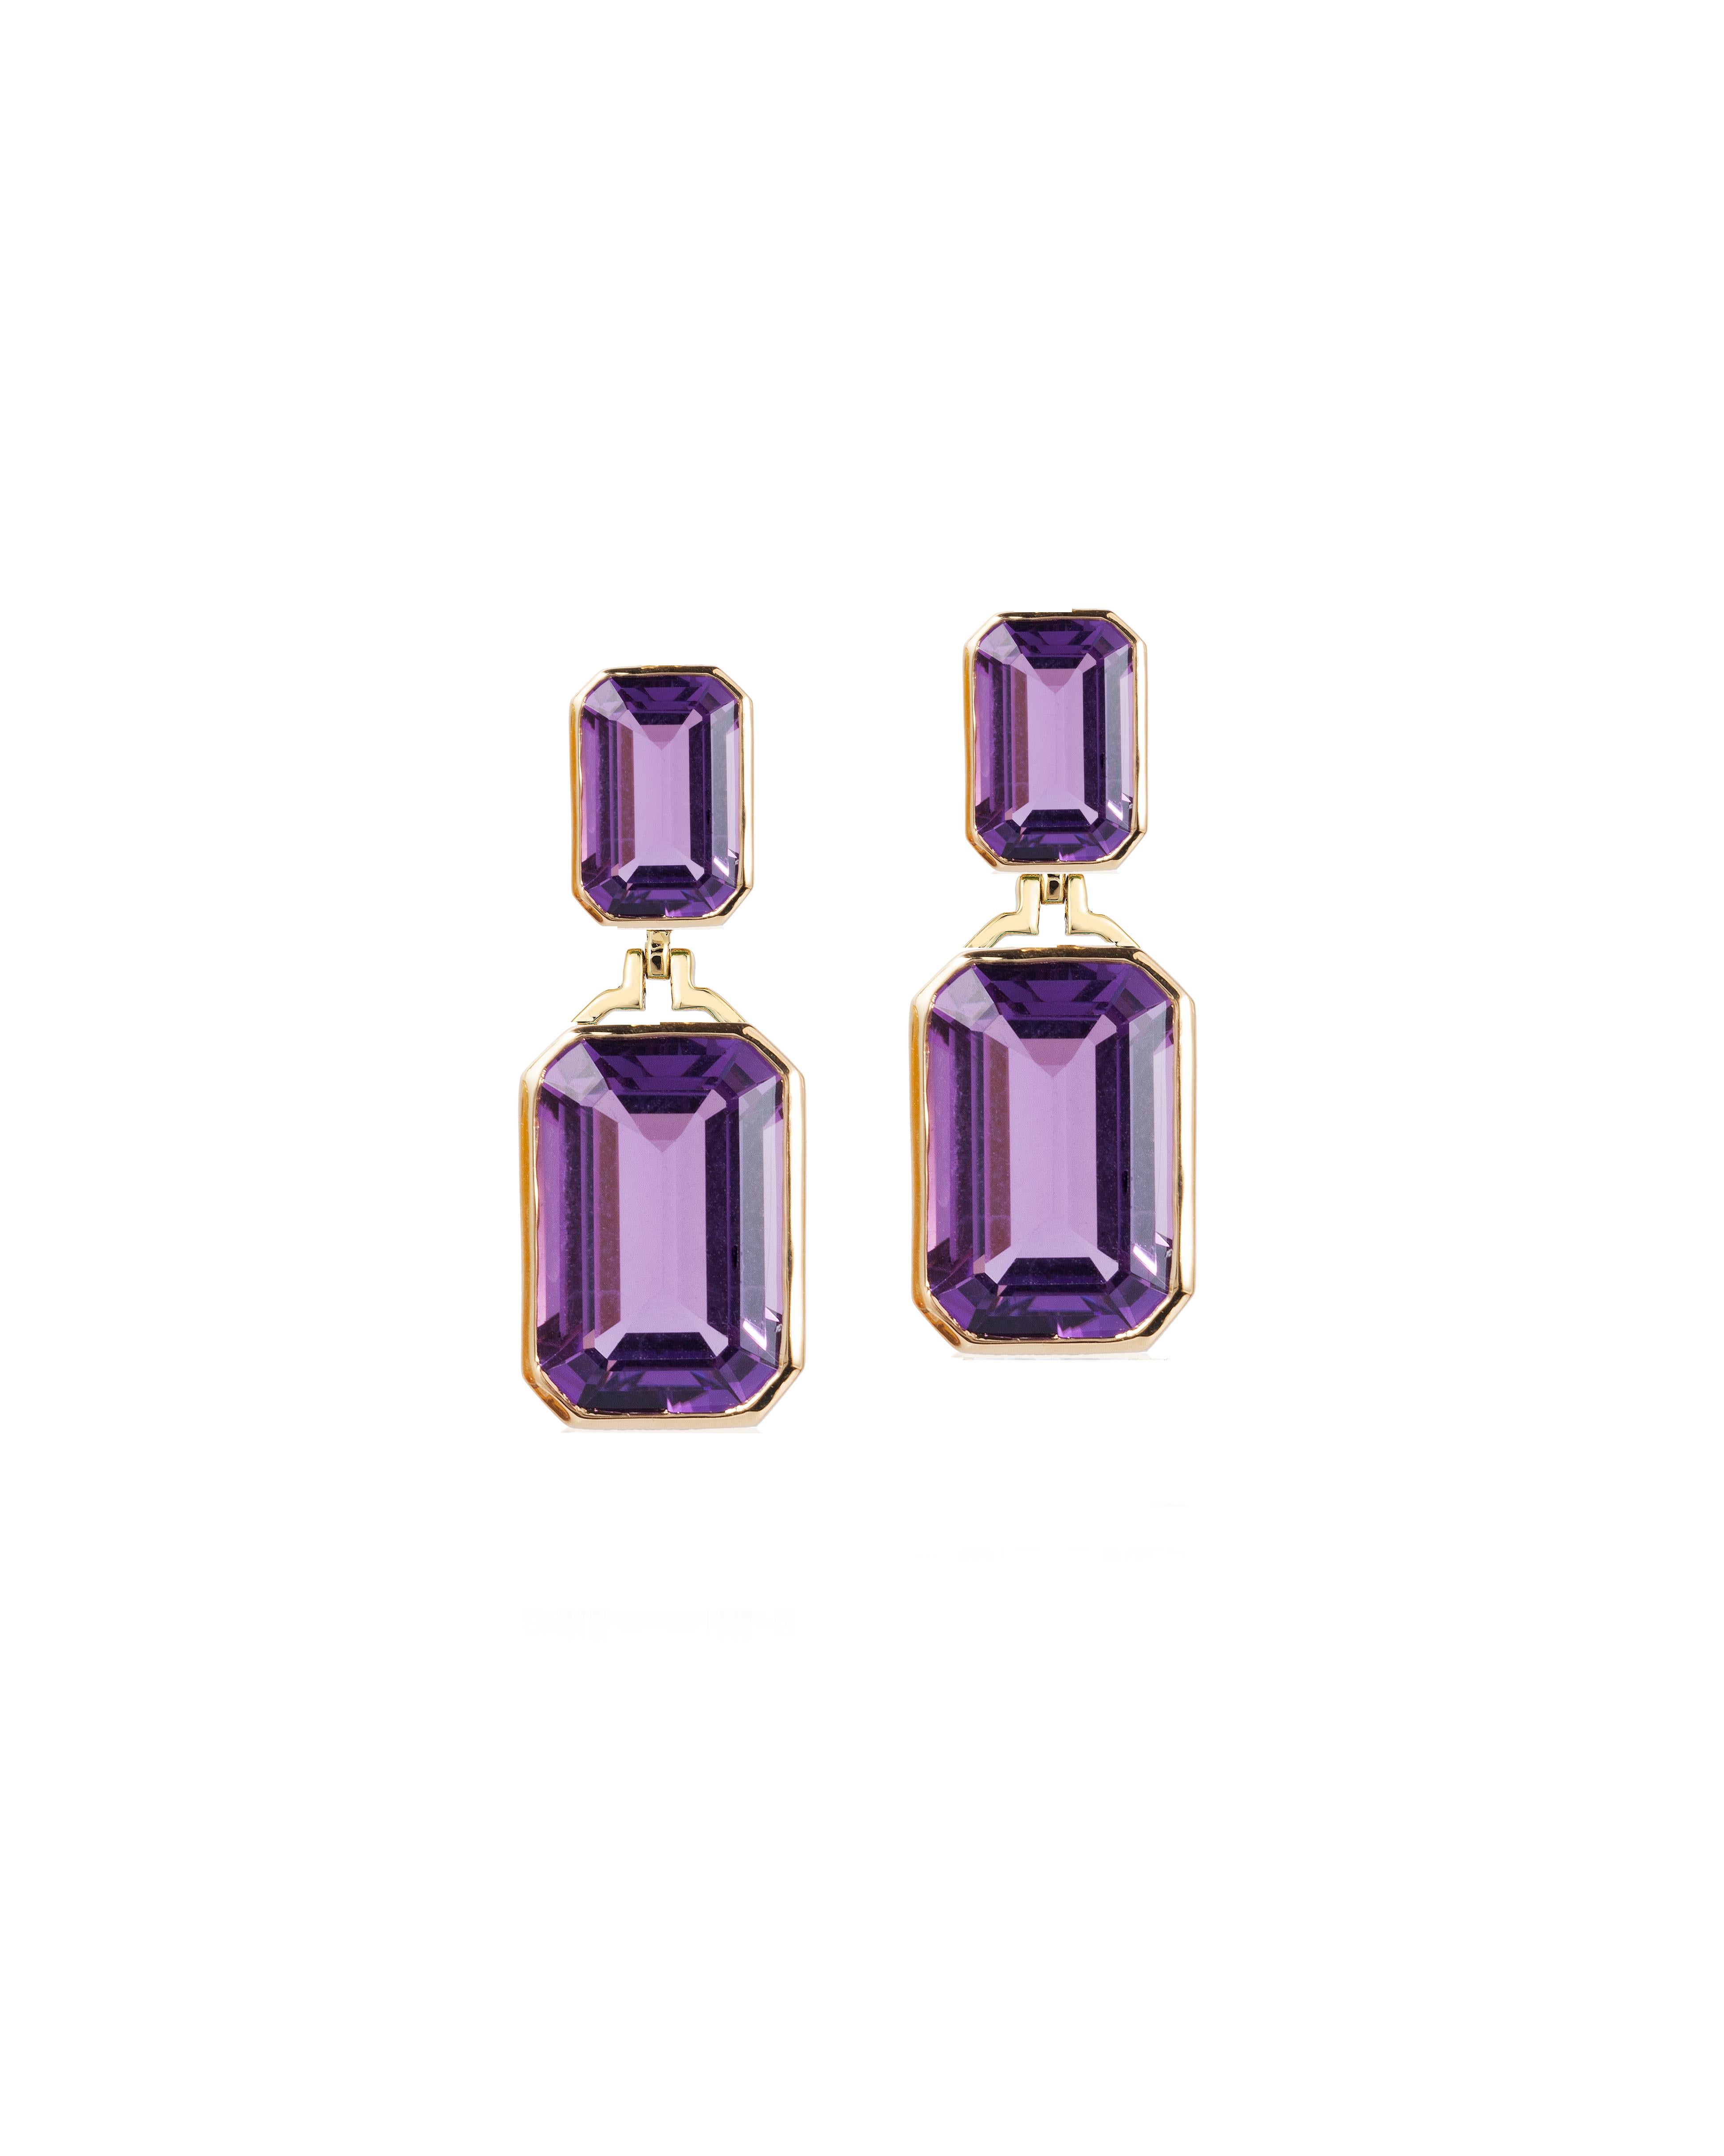 Amethyst Double Emerald Cut Earrings in 18K Yellow Gold, from 'Gossip' Collection
Stone Size: 15 x 10 mm & 7 x 10 mm 
Gemstone Approx Wt: Amethyst- 18.30 Carats